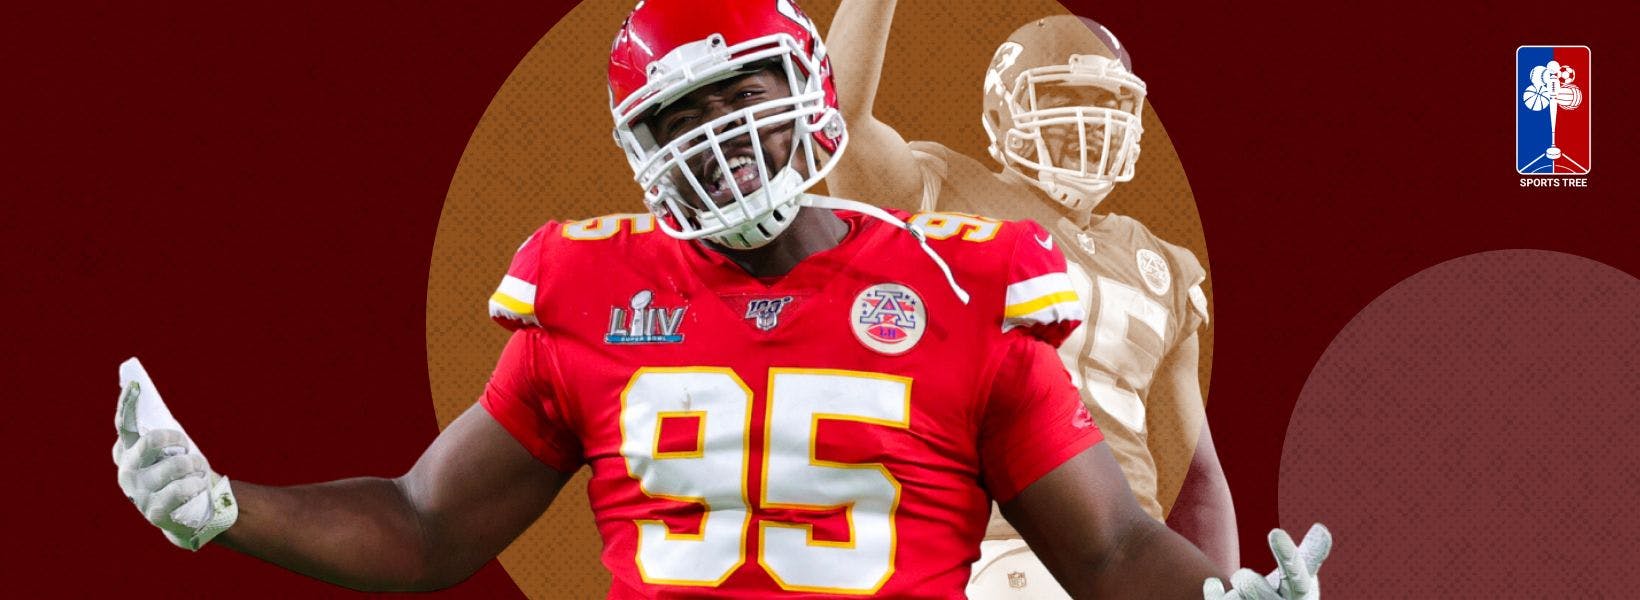 Chris Jones signed a new contract in KC